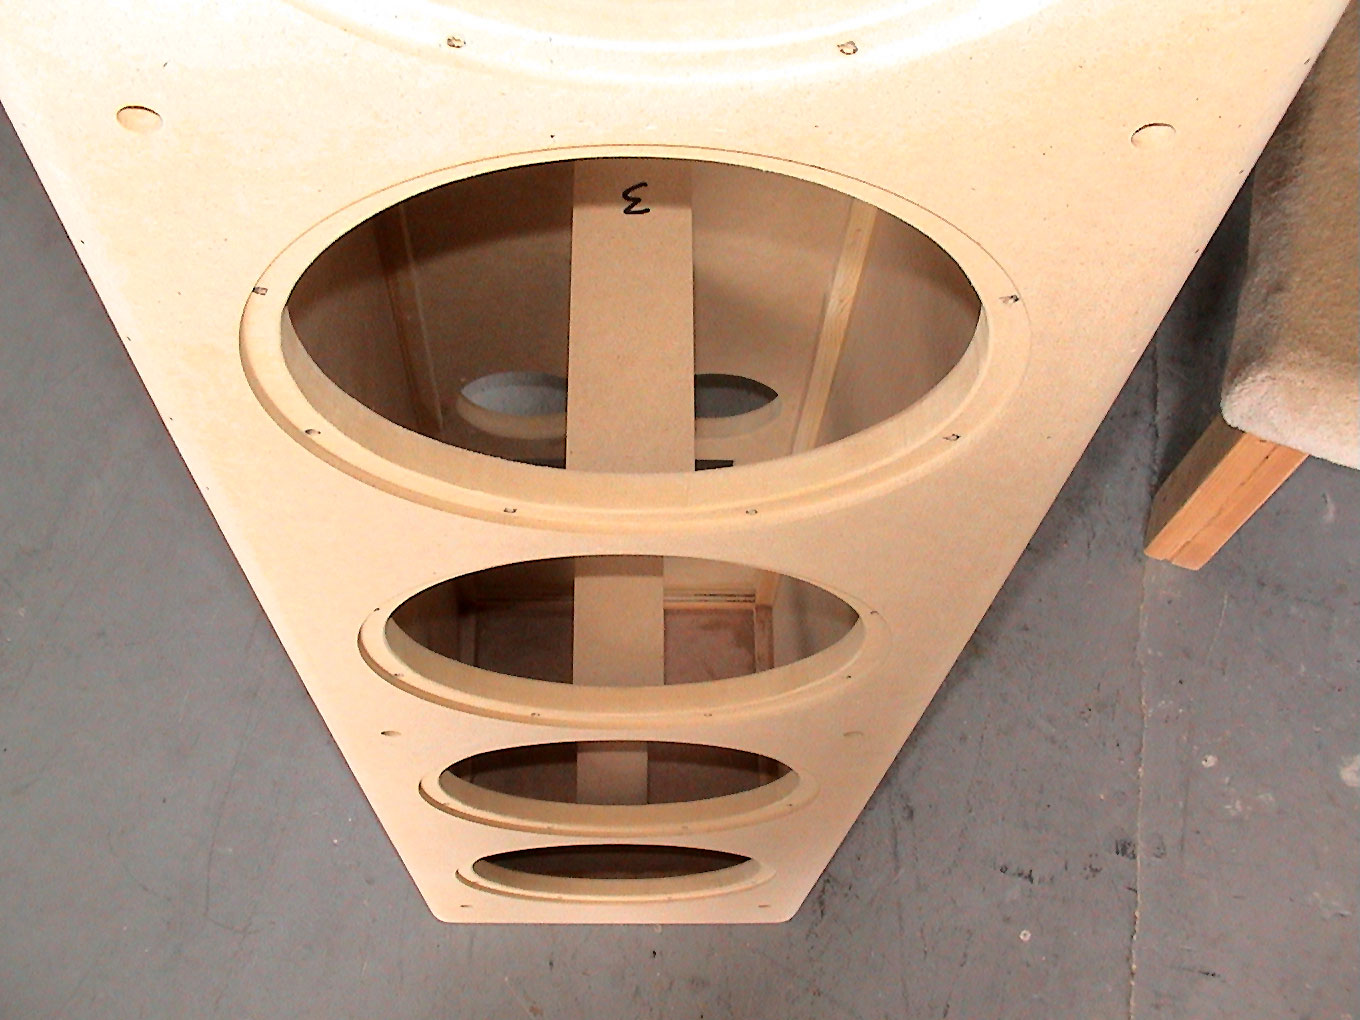 Power Tower Subwoofer